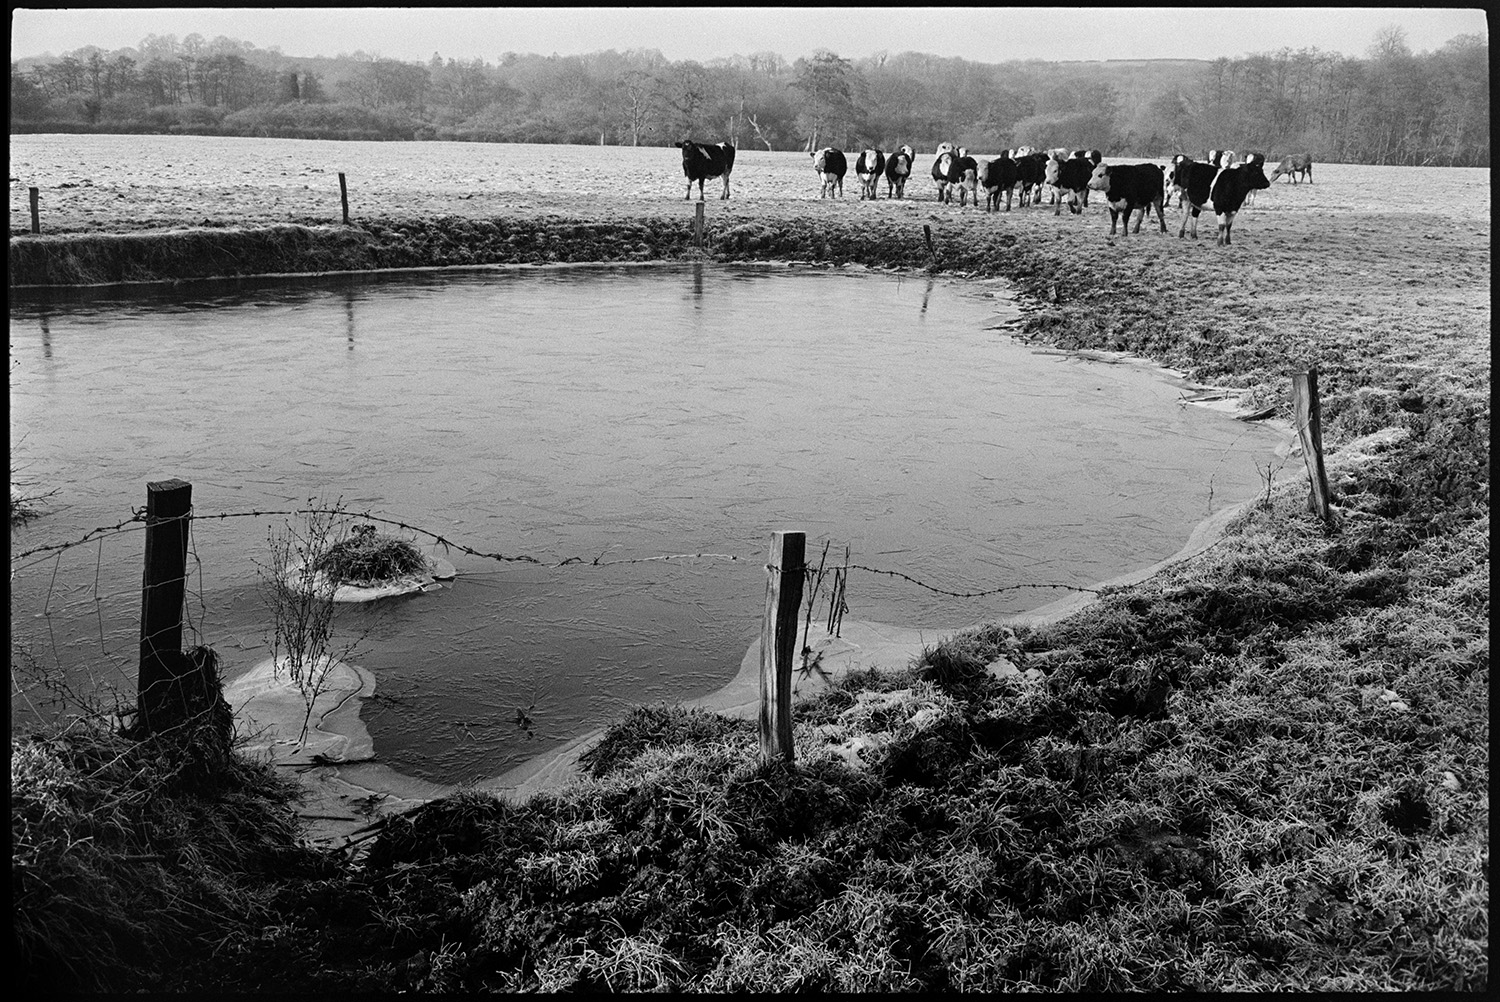 Bullocks, cows drinking from frozen pond by river, ice. 
[Bullocks in a frosty field by a frozen pond at Bridgetown, Iddesleigh. A barbed wire fence is around part of the pond.]